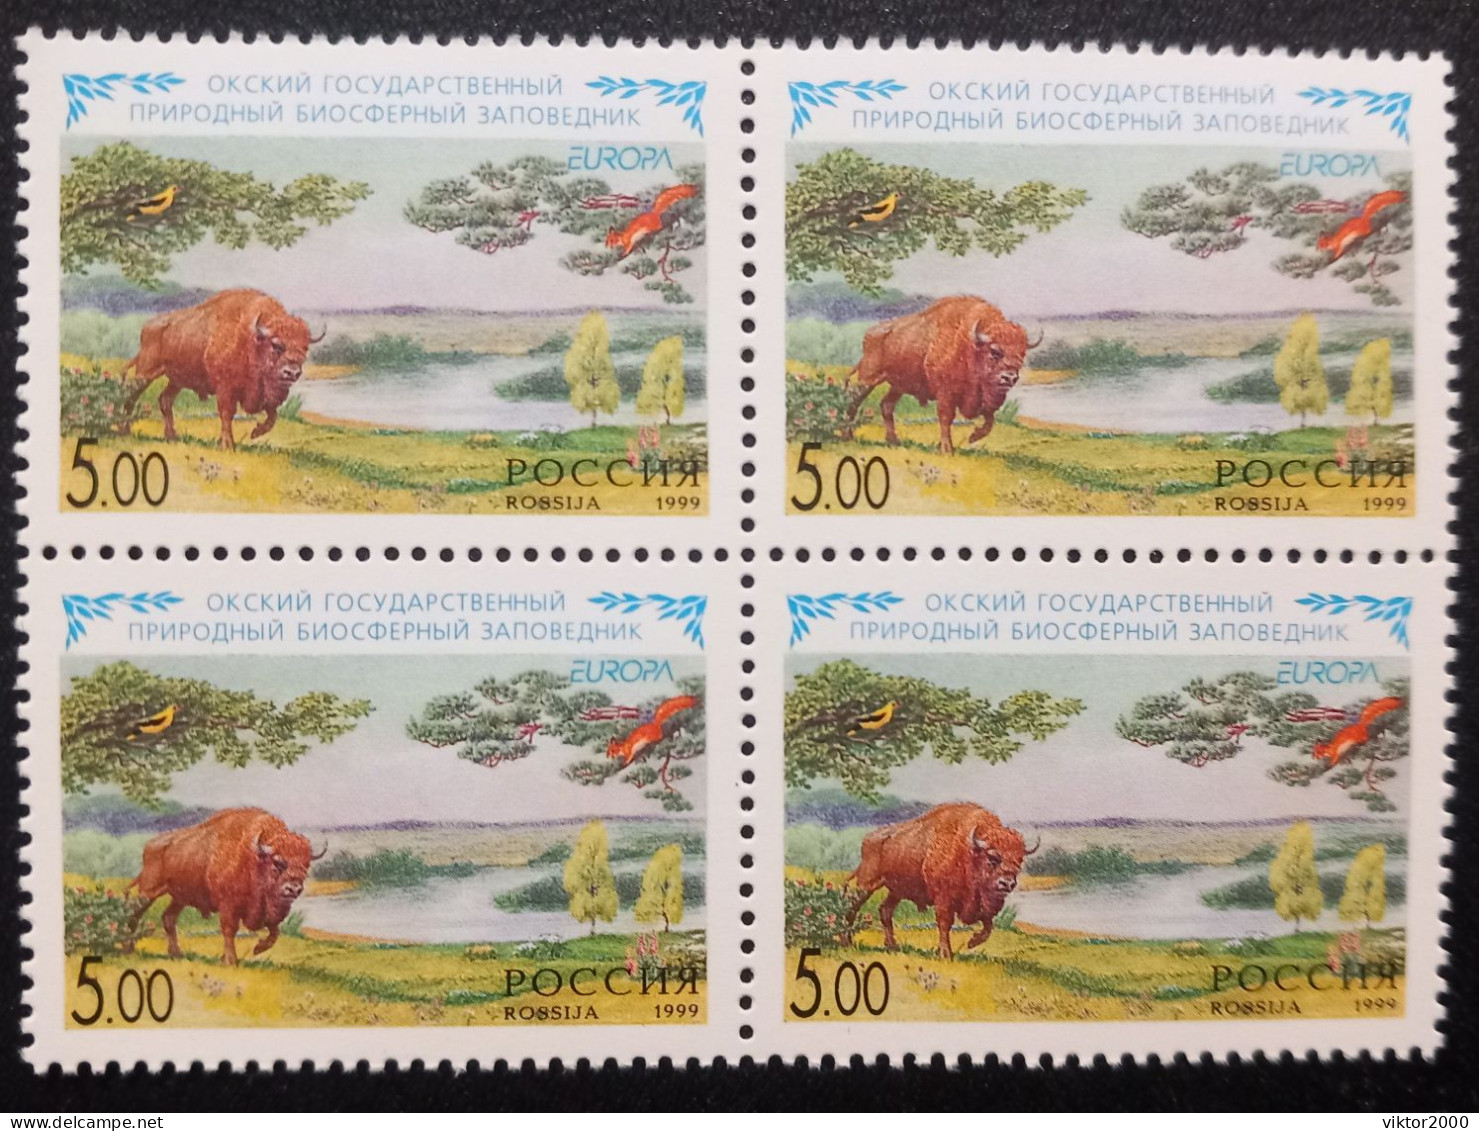 RUSSIA  MNH (**)1999 Oksky State Natural Biosphere Preserve.bison "Europe" Program Issue.Mi 722 - Unused Stamps